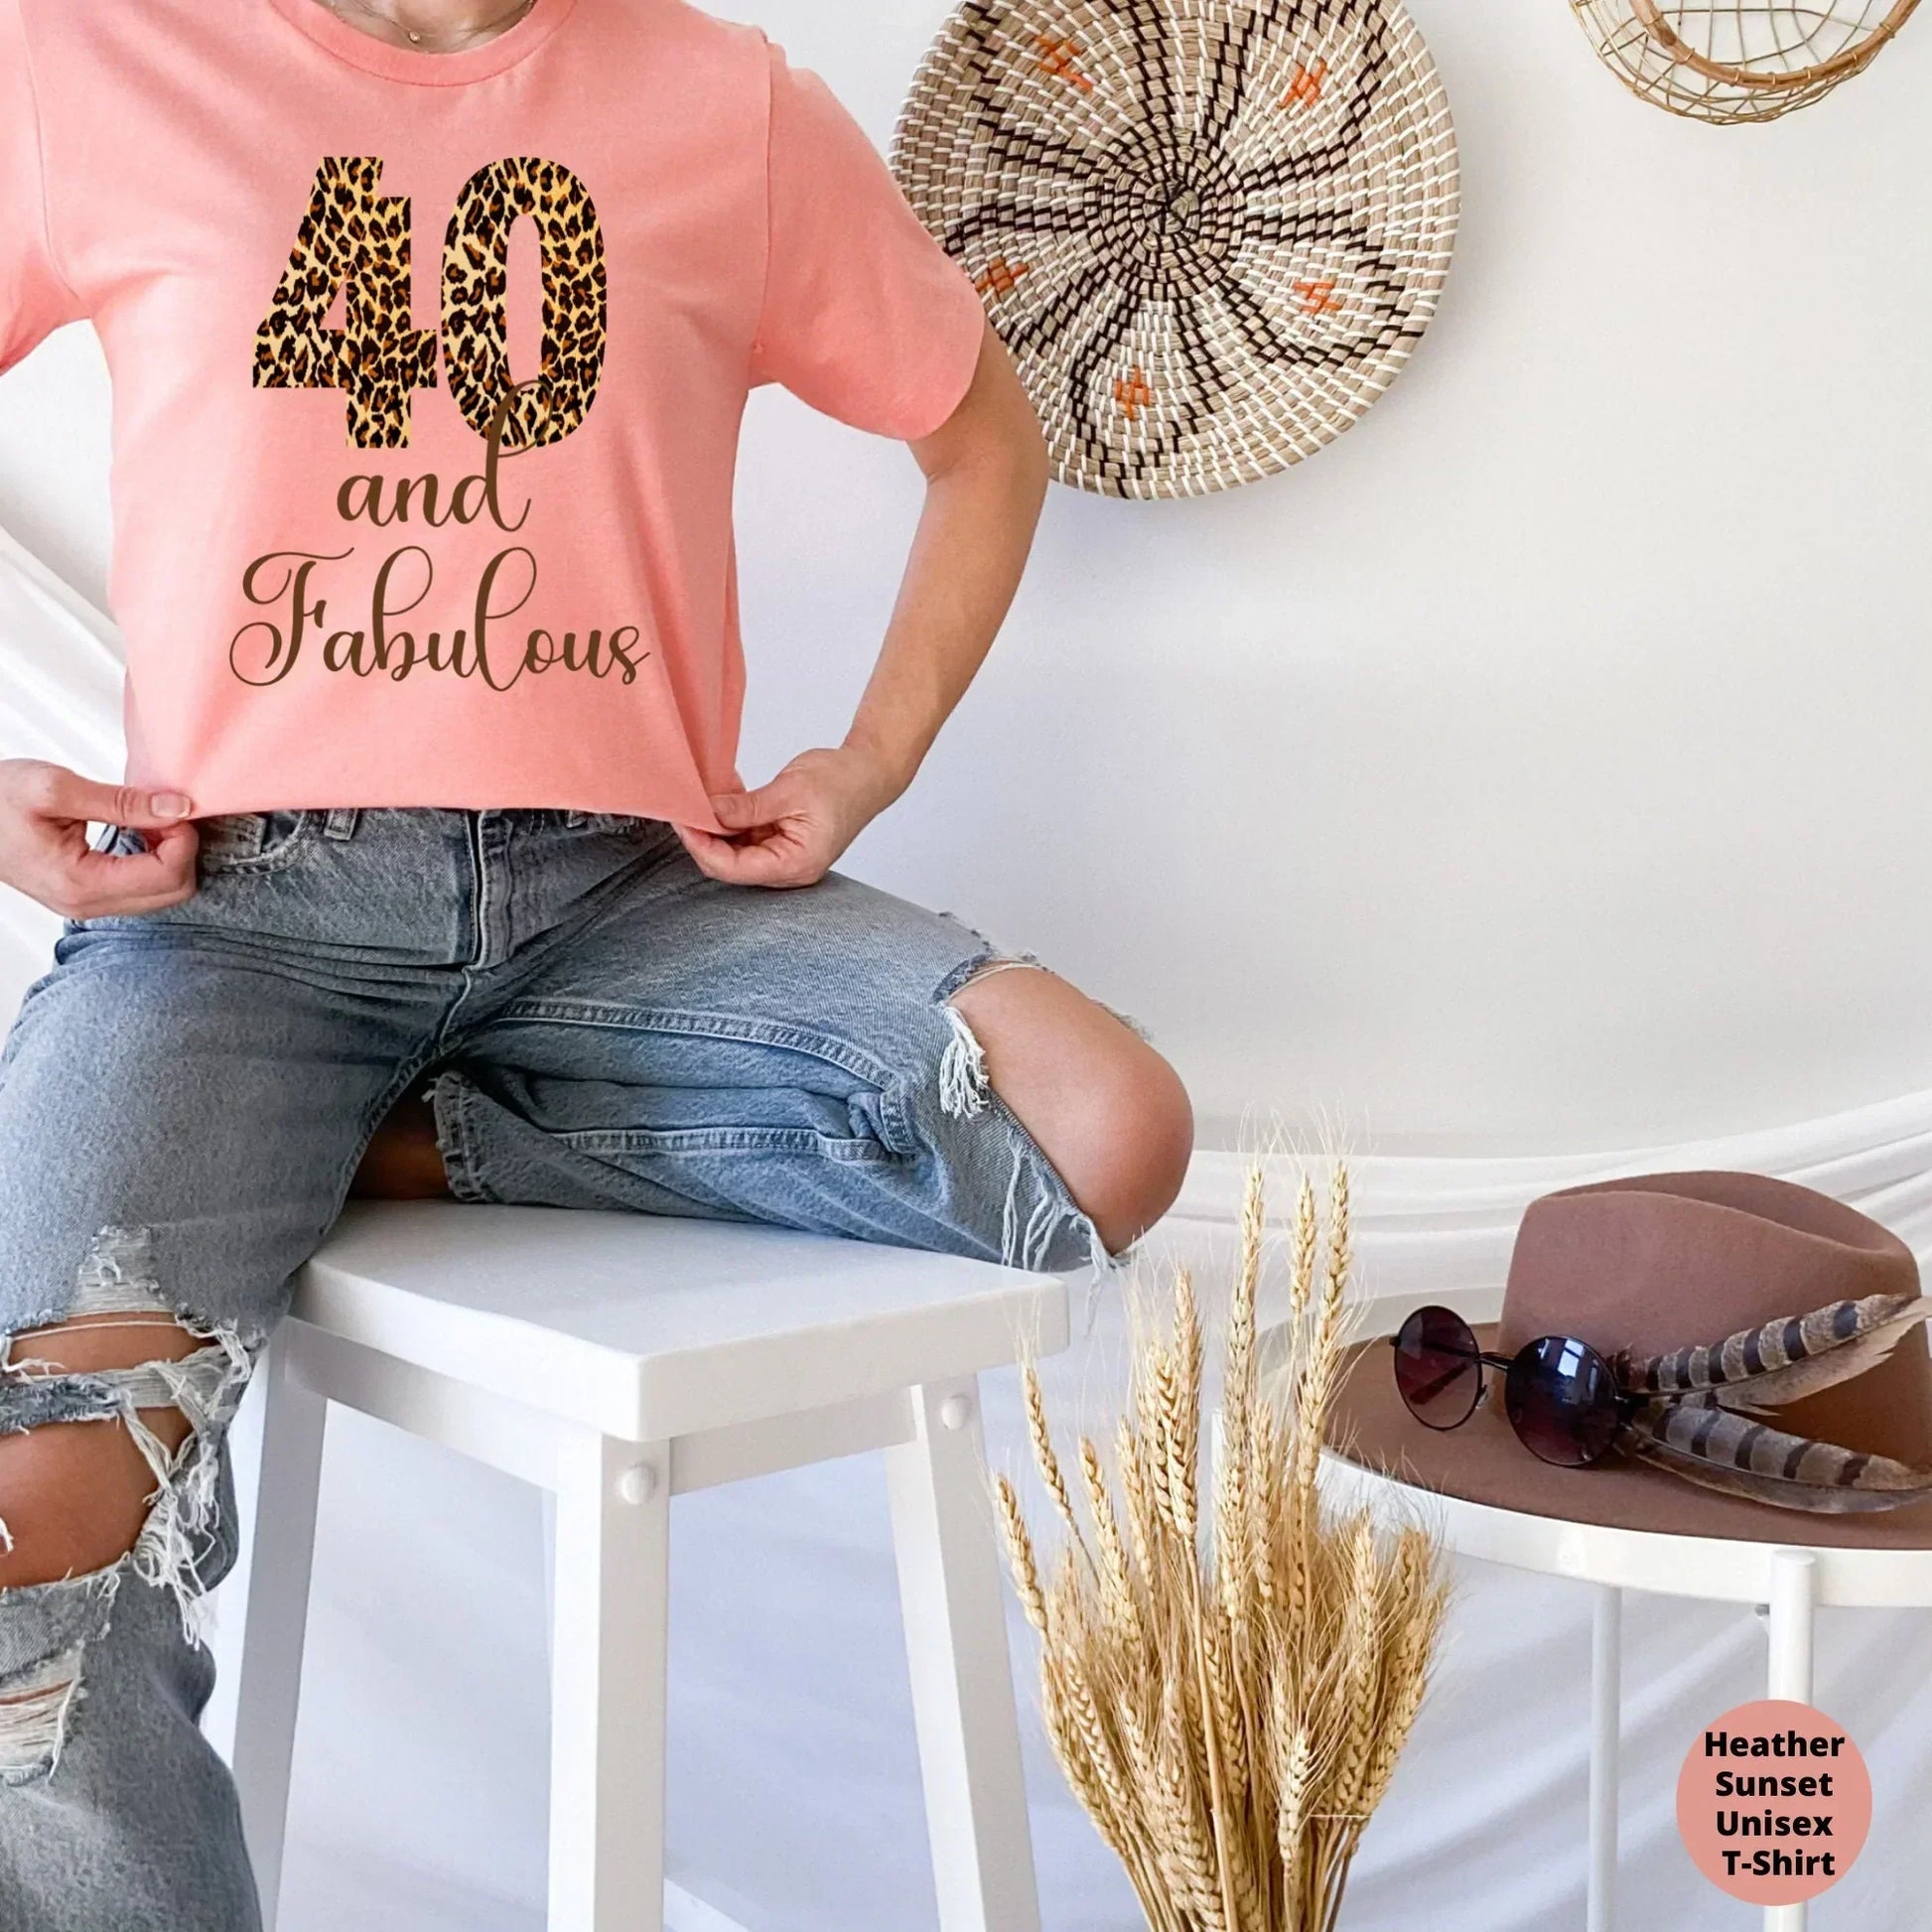 40 and Fabulous, 40th Birthday Shirt, Birthday Group Shirt, Forty and Fabulous